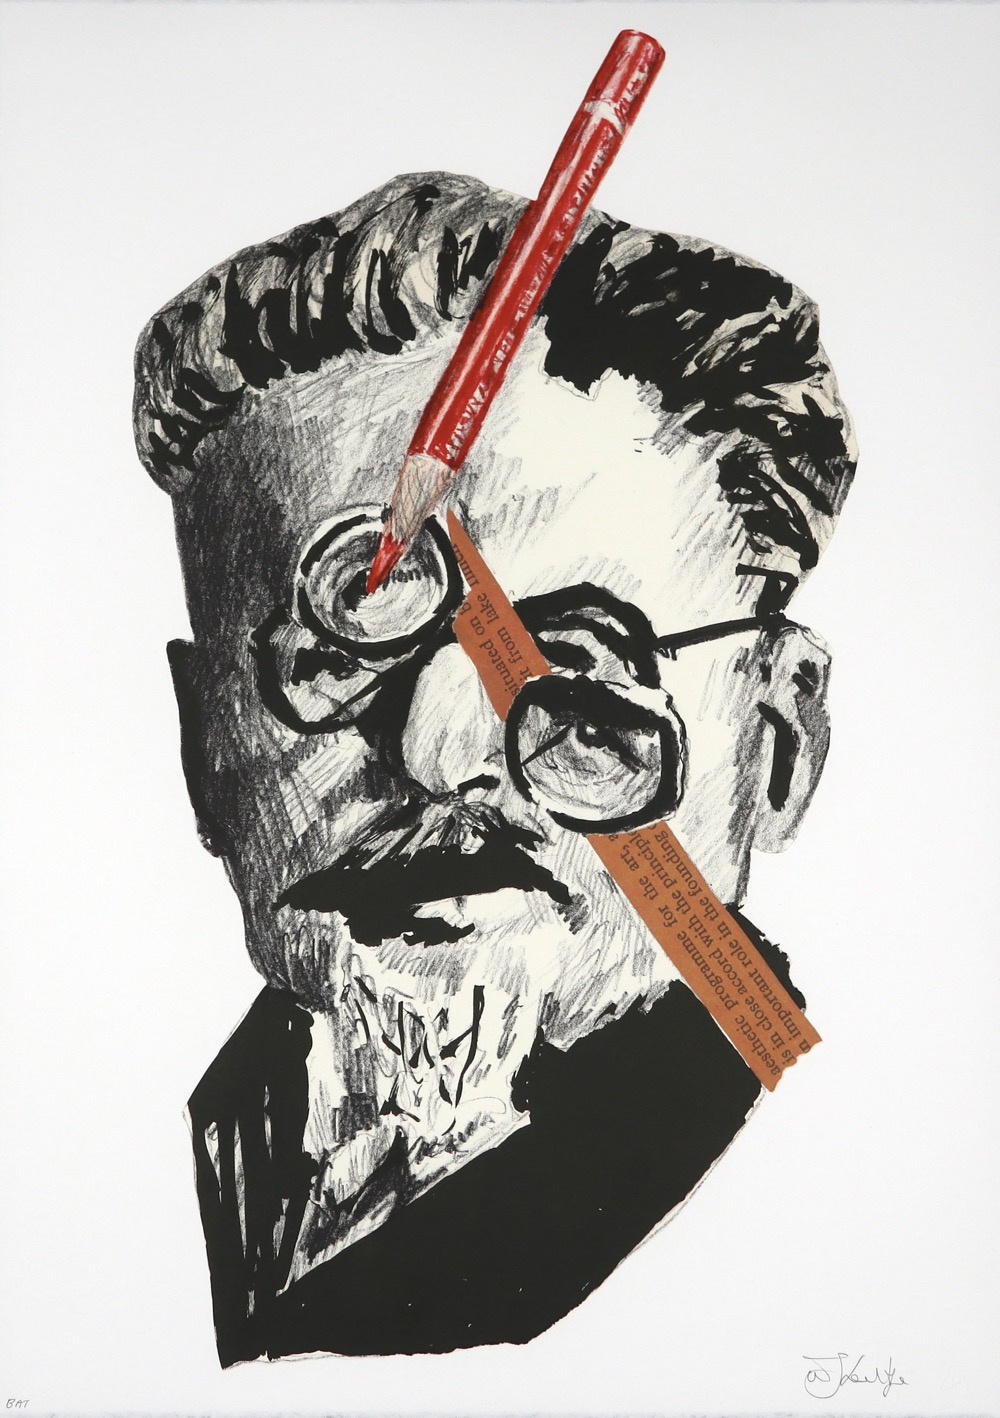 Portrait of Trotsky in red and black on white background. Red pencil in front of the forehead and multiple spectacles and eyes by William Kentridge.